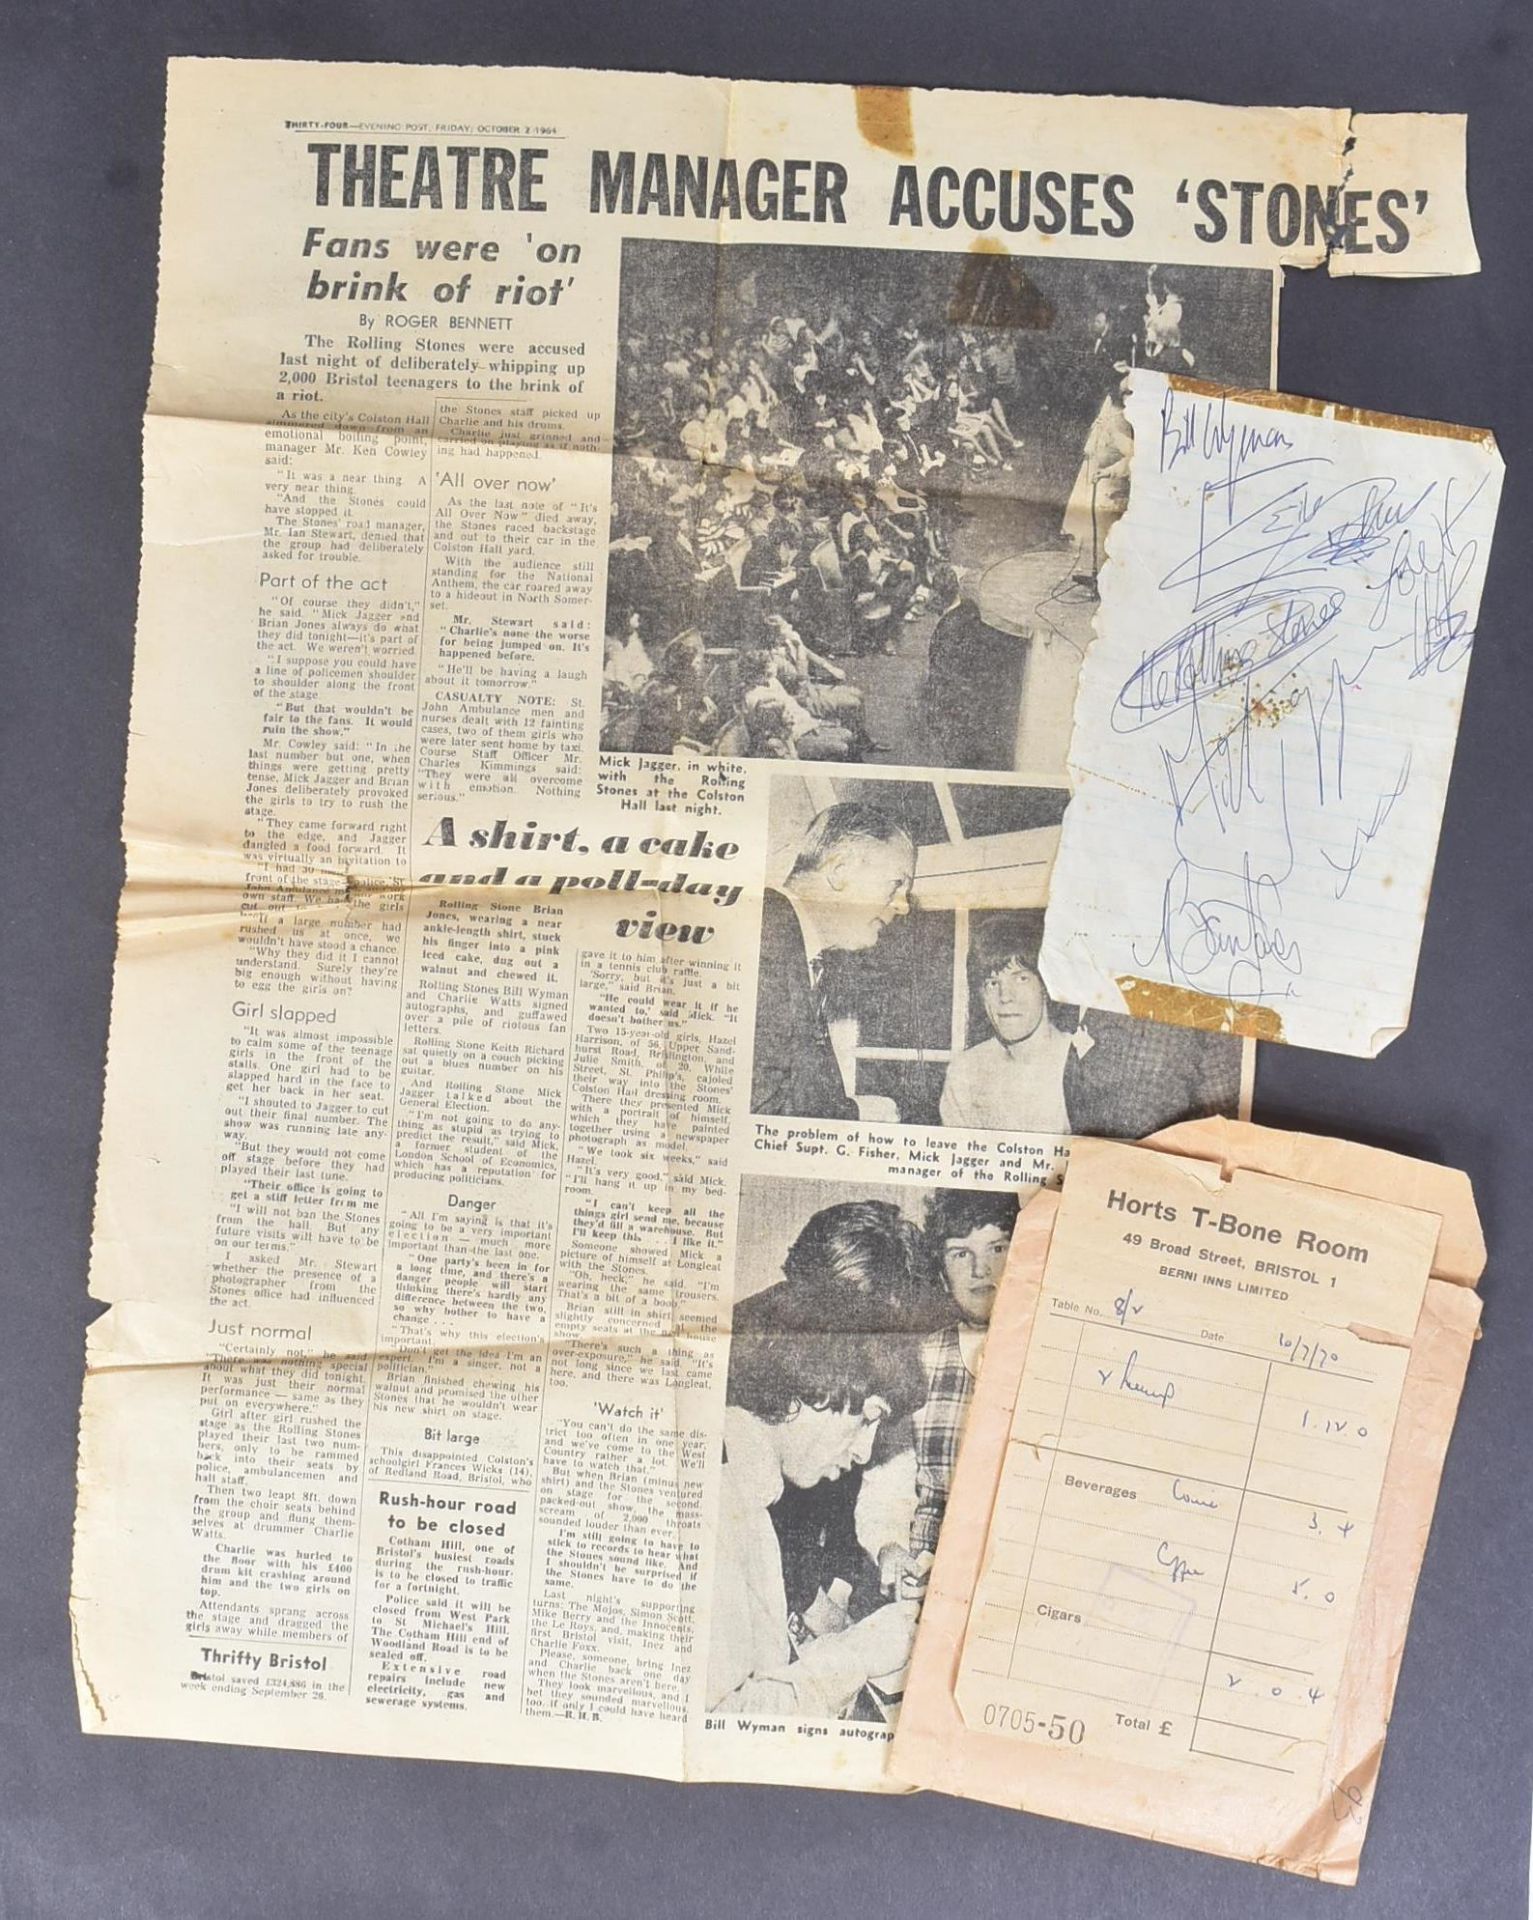 THE ROLLING STONES - AUTOGRAPHS FROM BRISTOL 1964 - Image 2 of 5